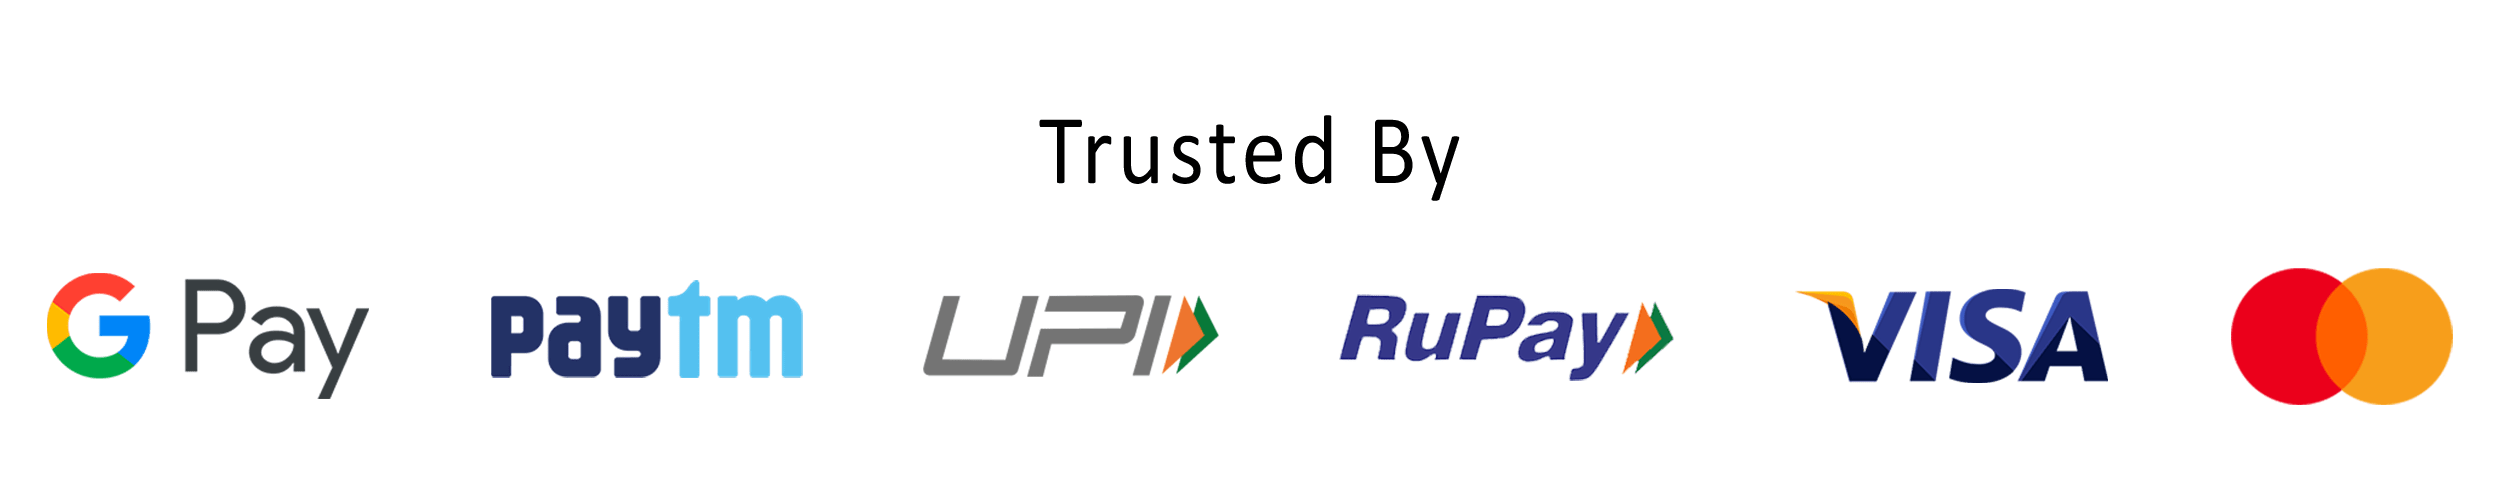 Trusted by payment providers